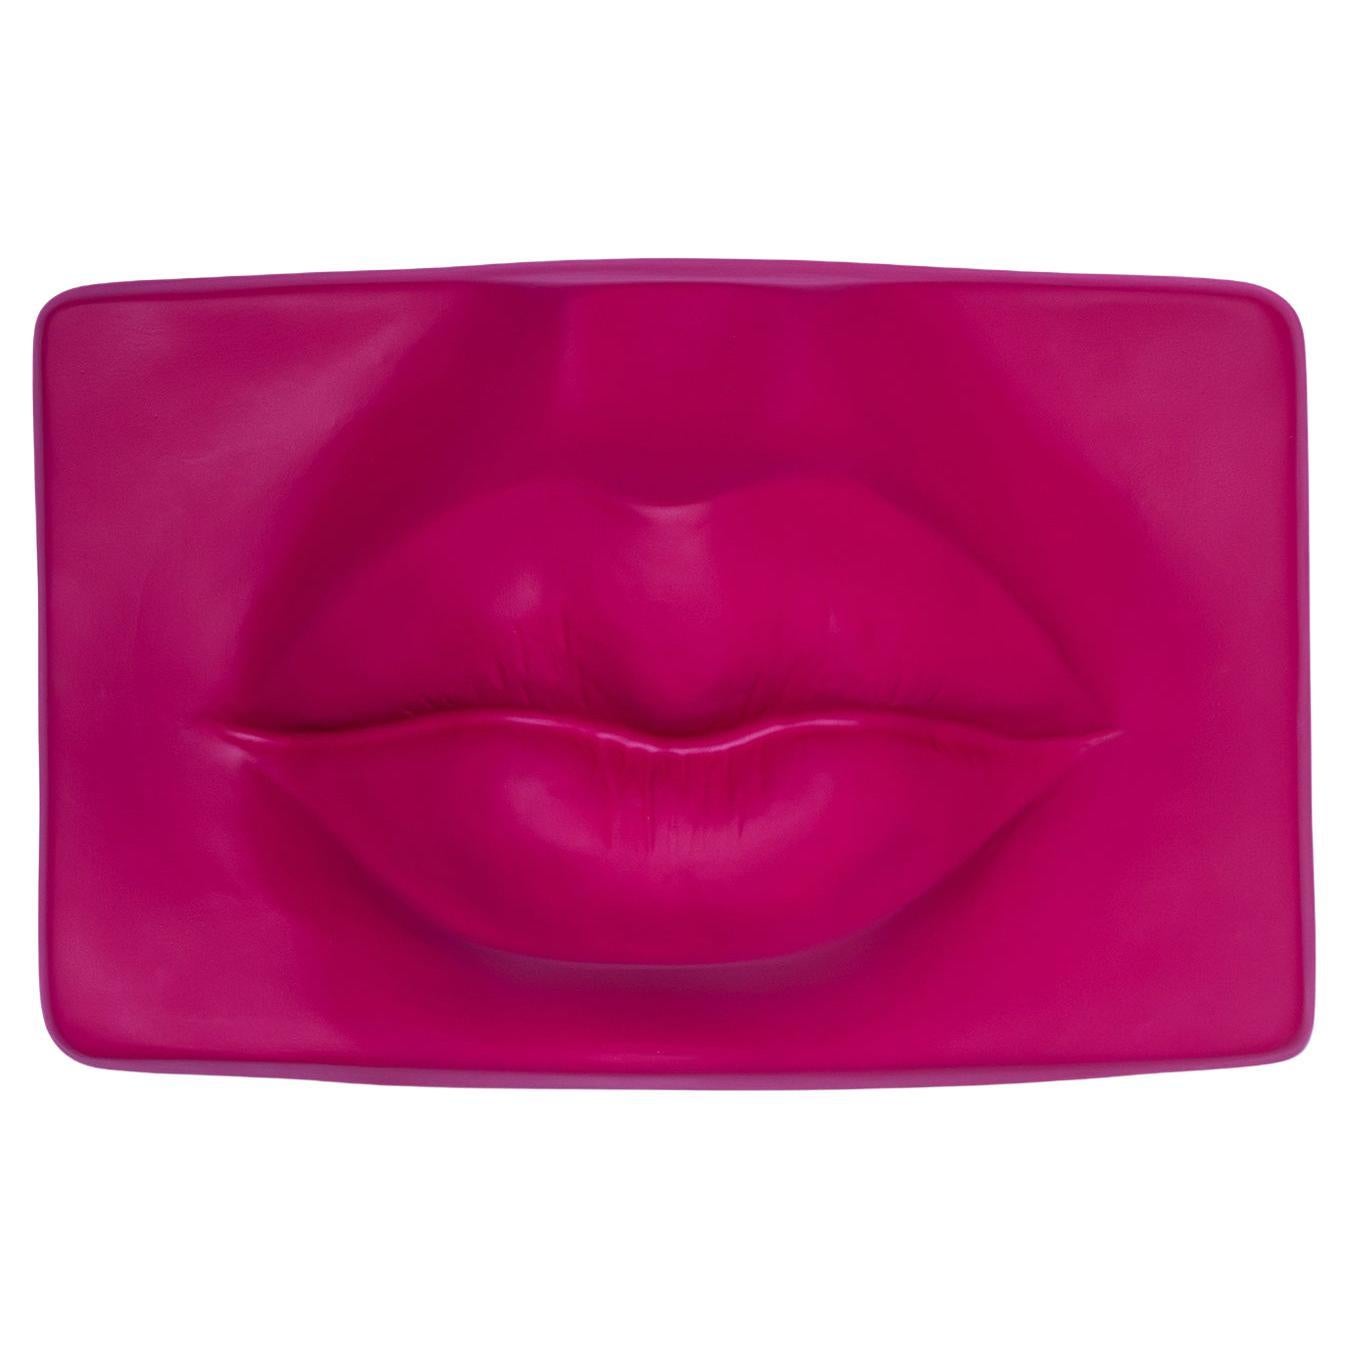 Lips Ruby Woo Sculpture For Sale